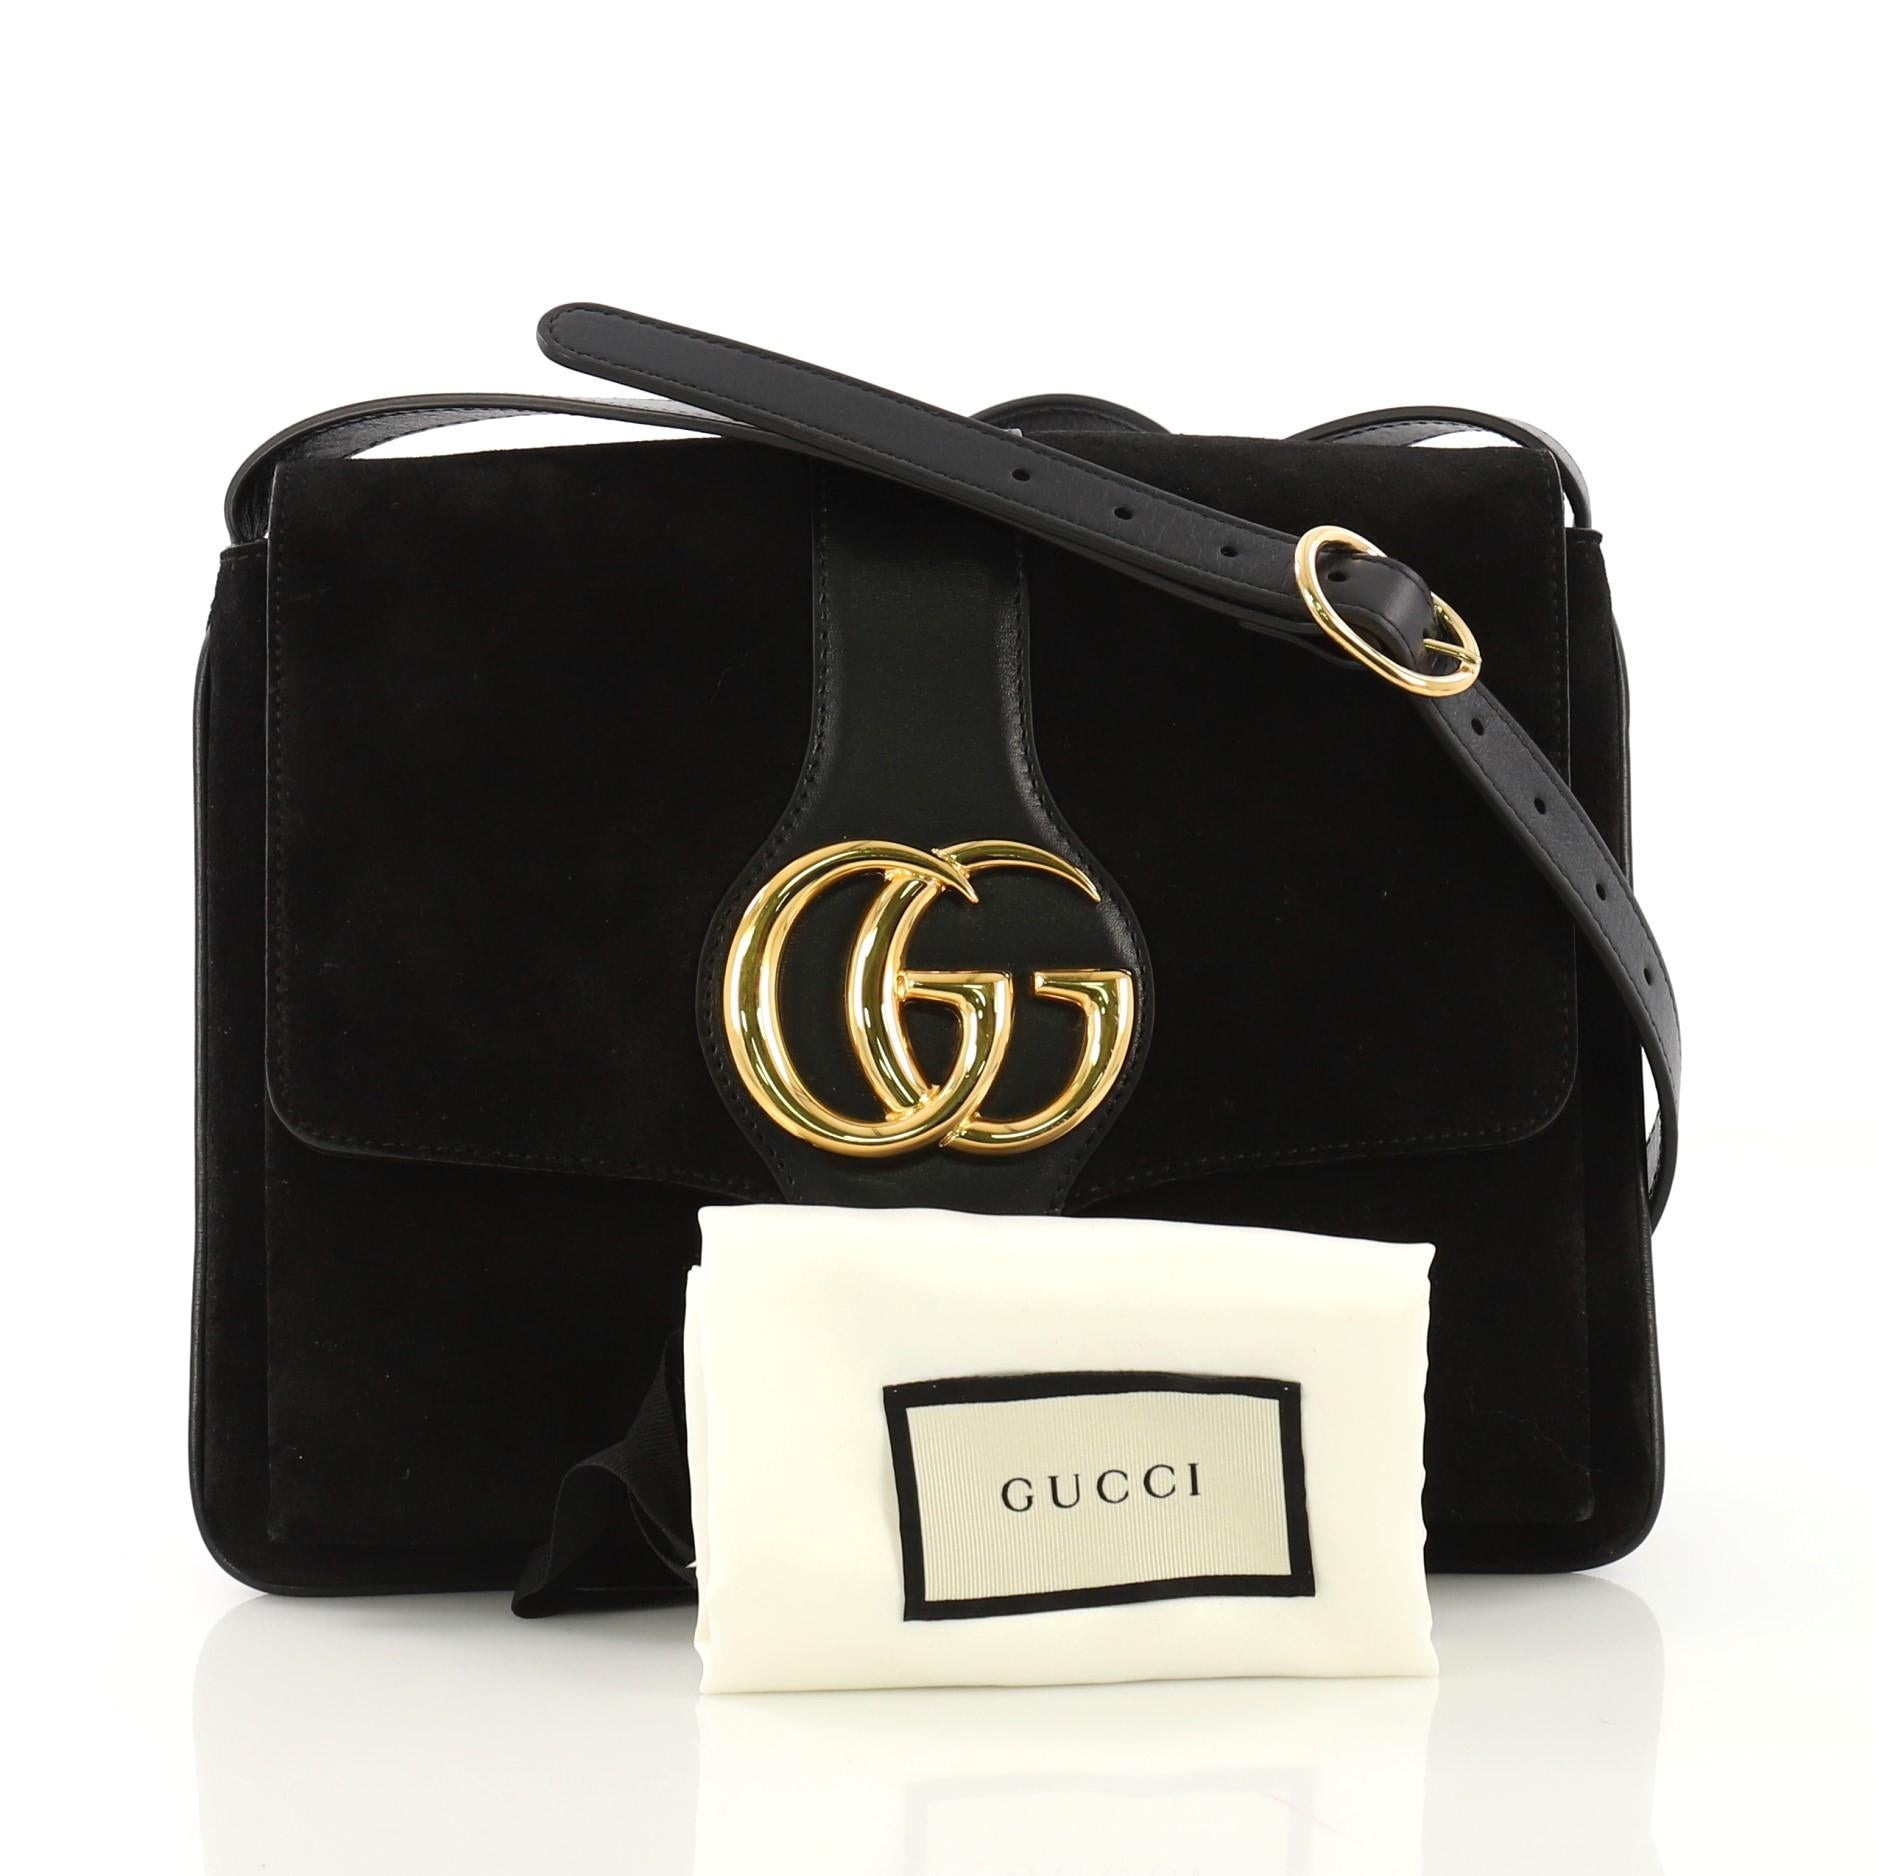 This Gucci Arli Shoulder Bag Suede with Leather Medium, crafted from black suede with leather, features an adjustable leather strap, flap top with GG logo, and gold-tone hardware. Its magnetic snap closure opens to a pink fabric interior with zip